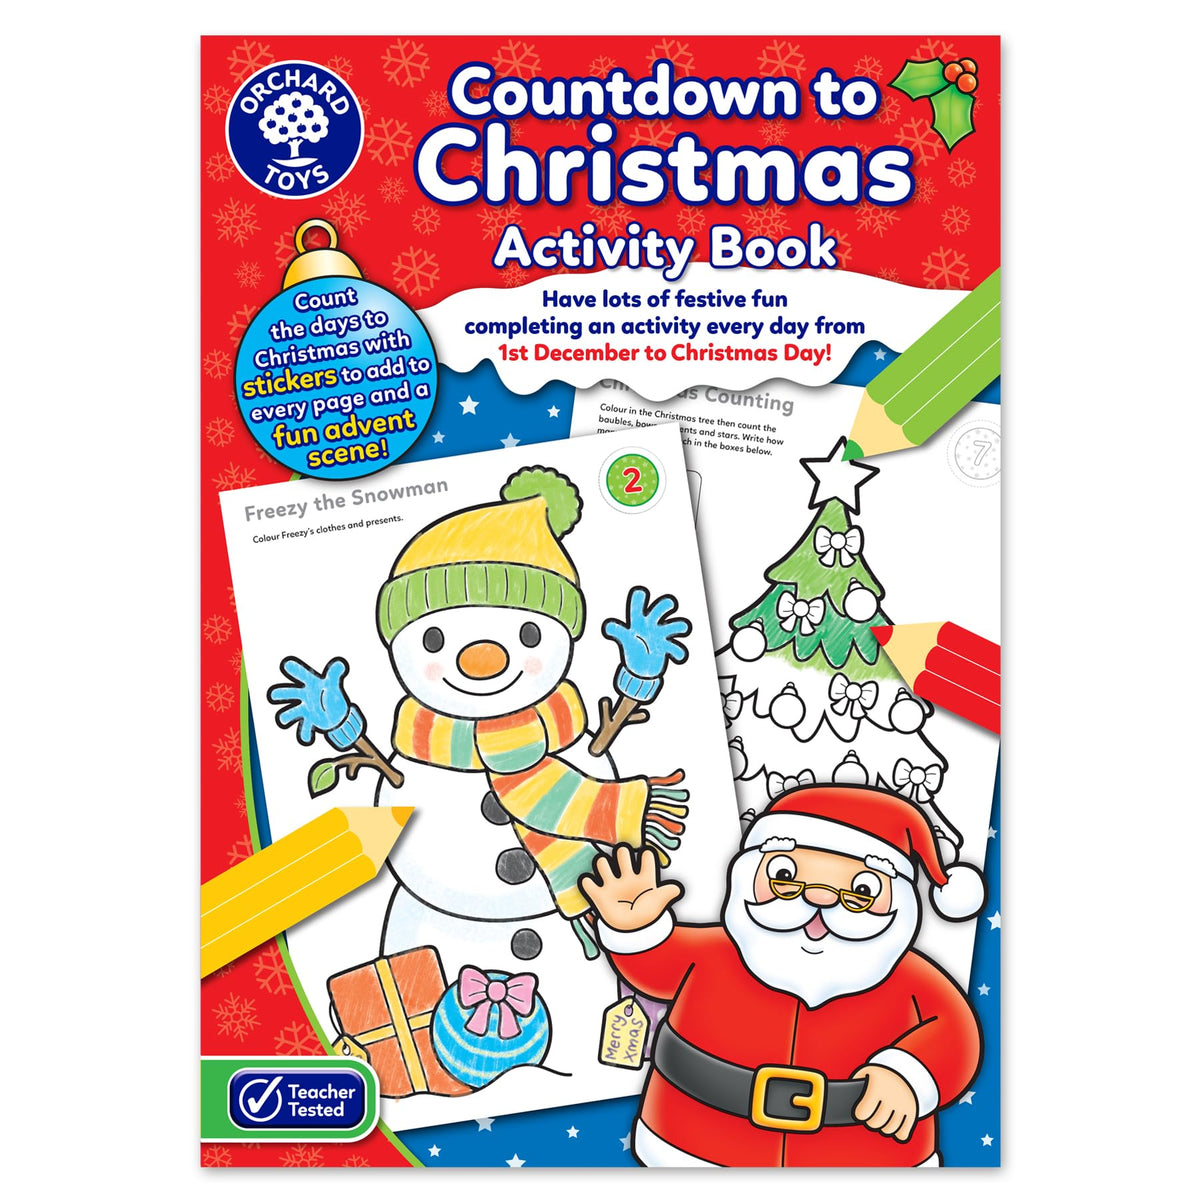 Orchard Toys Countdown to Christmas Activity Book, Festive Colouring and Activity Book, Includes Advent Scene and Stickers, For Kids,Multicoloured,297 x 210 x 1 millimeters